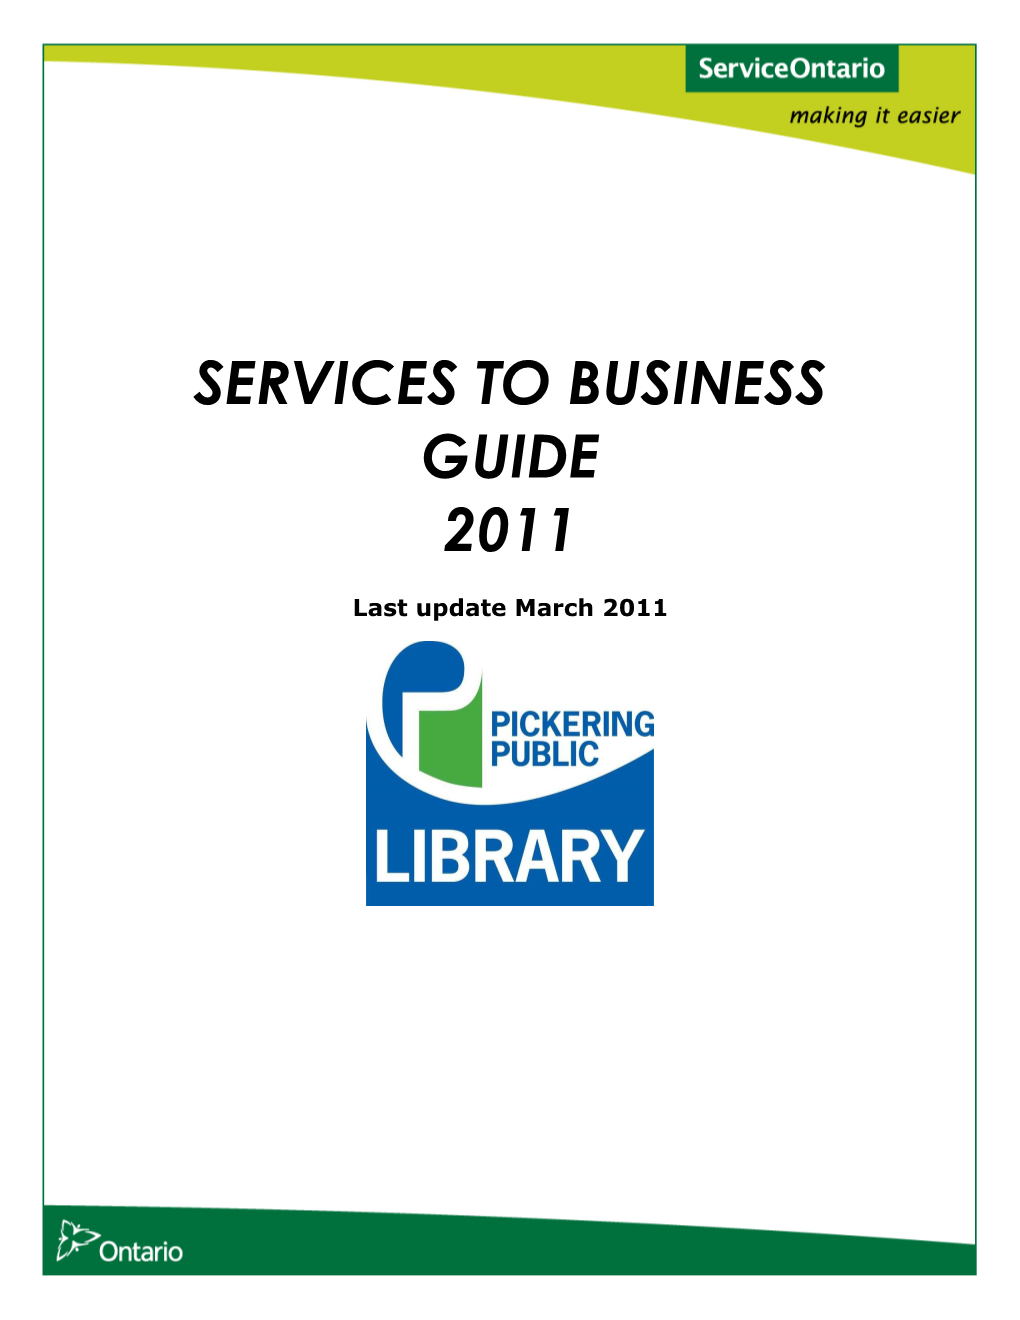 Services to Business Guide 2011